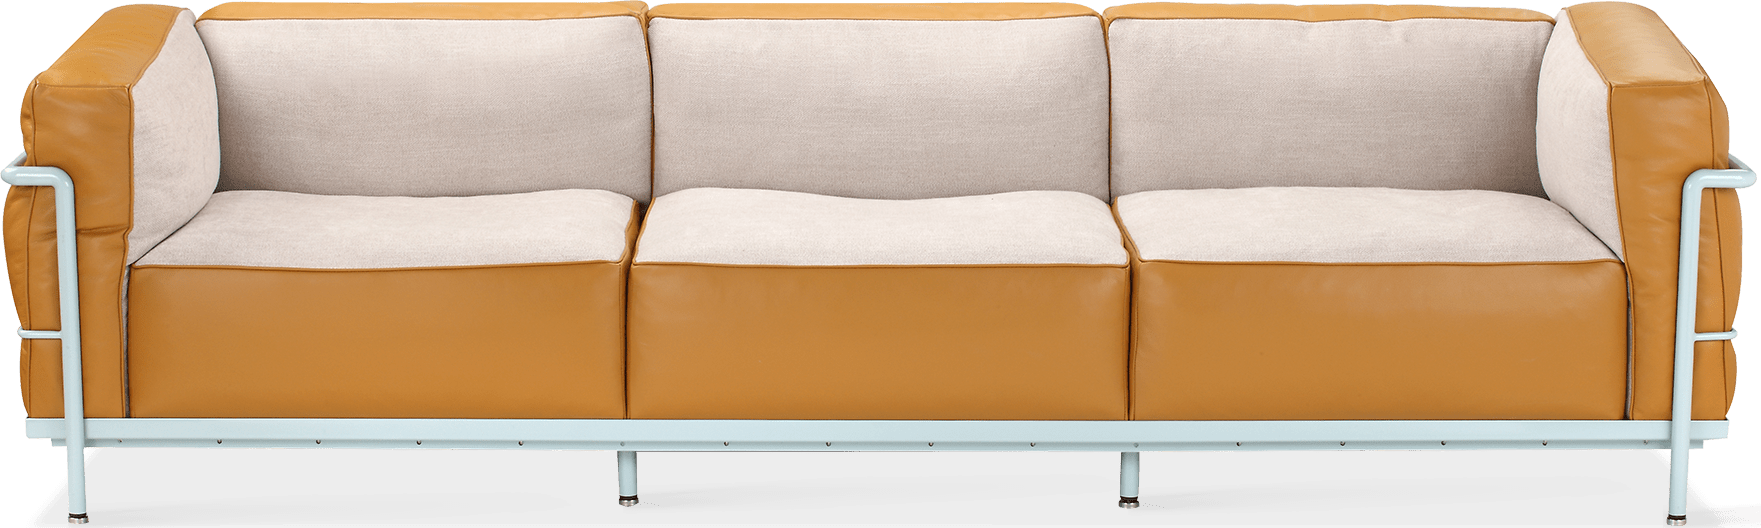 LC3 Style Grande 3 Seat Sofa - Special Edition Camel image.